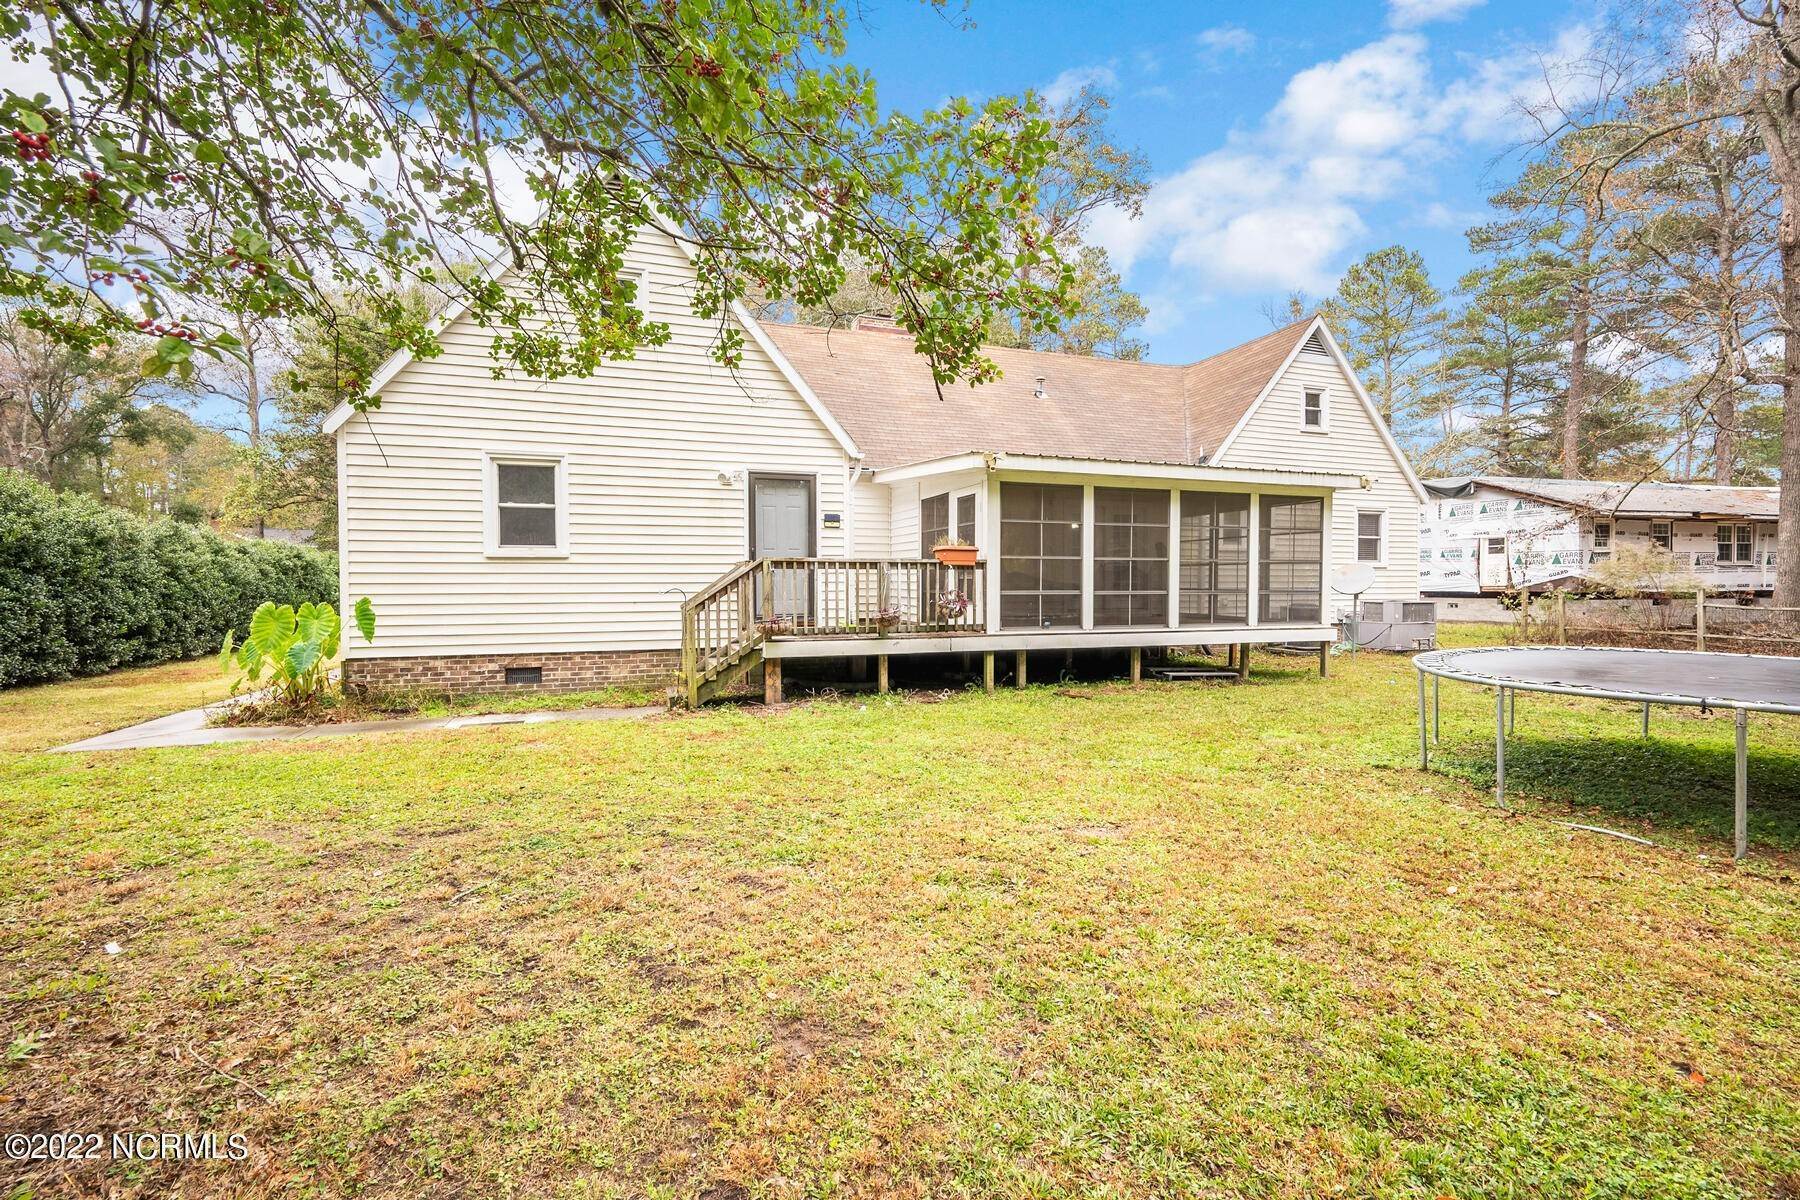 20. Single Family for Sale at Greenville, NC 27834